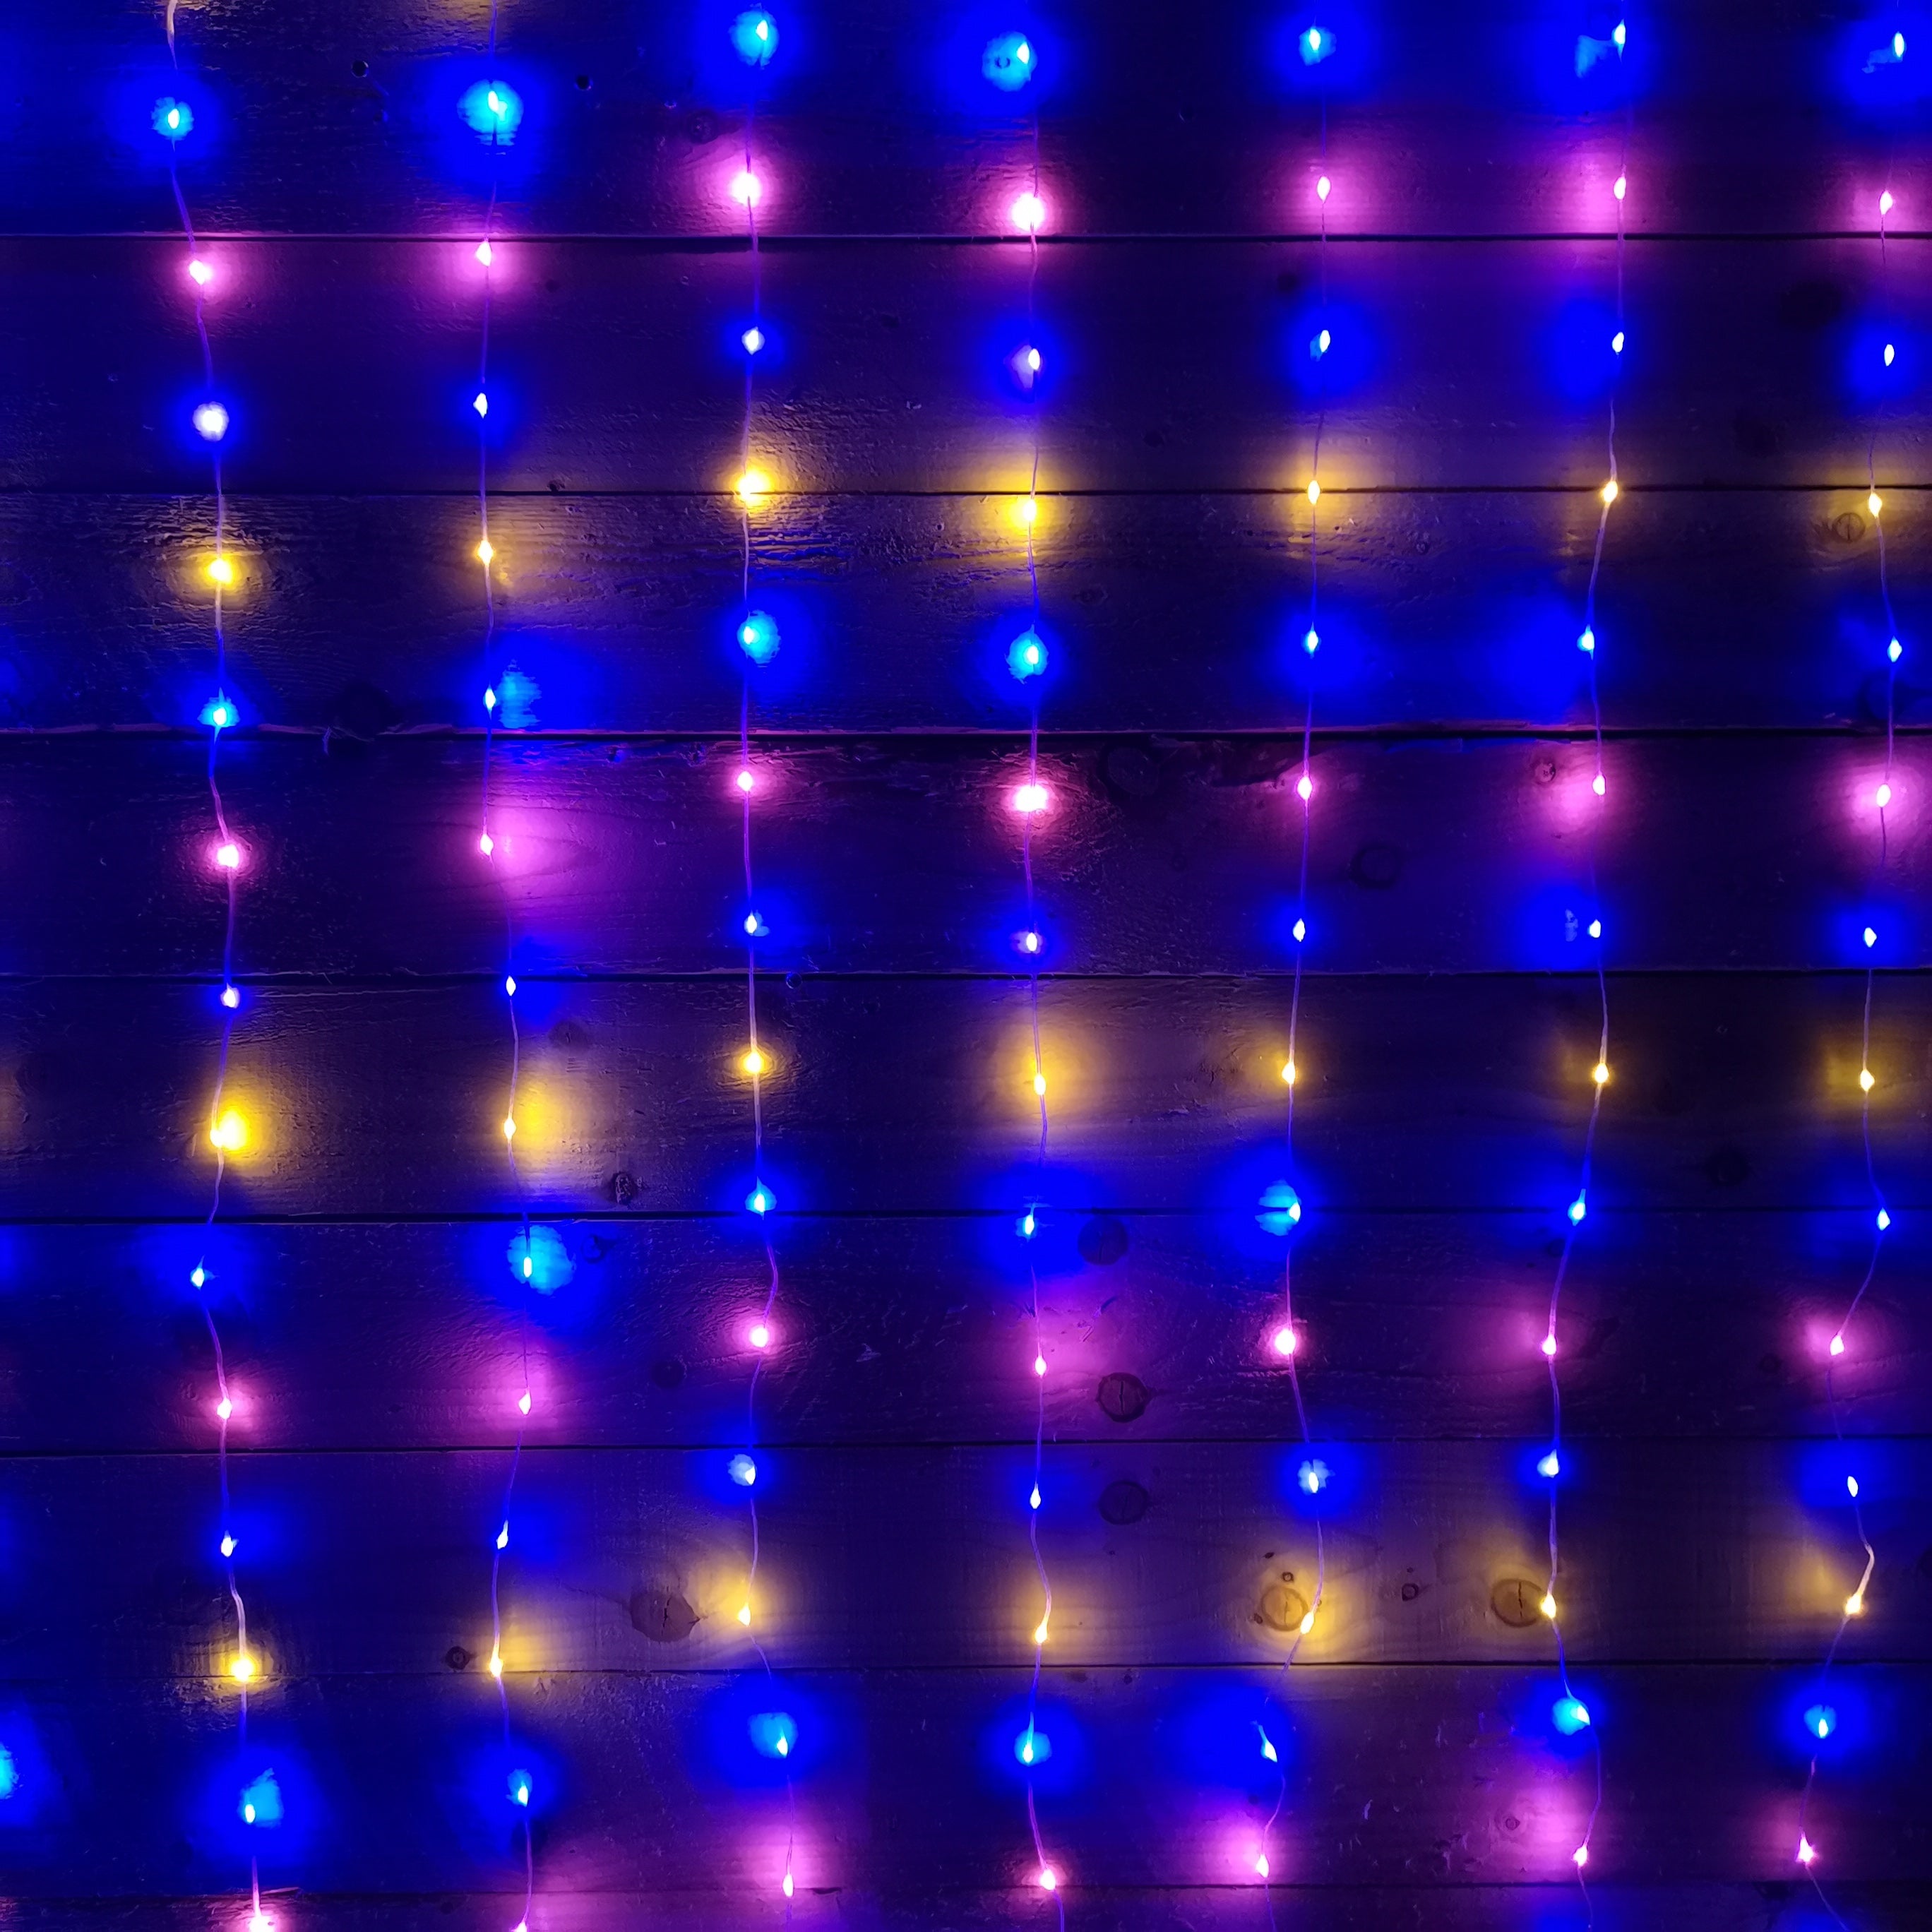 240 LED 2m x 1.5m Premier Flexibright Curtain Indoor Outdoor Multifunction Christmas Lights with Timer in Rainbow